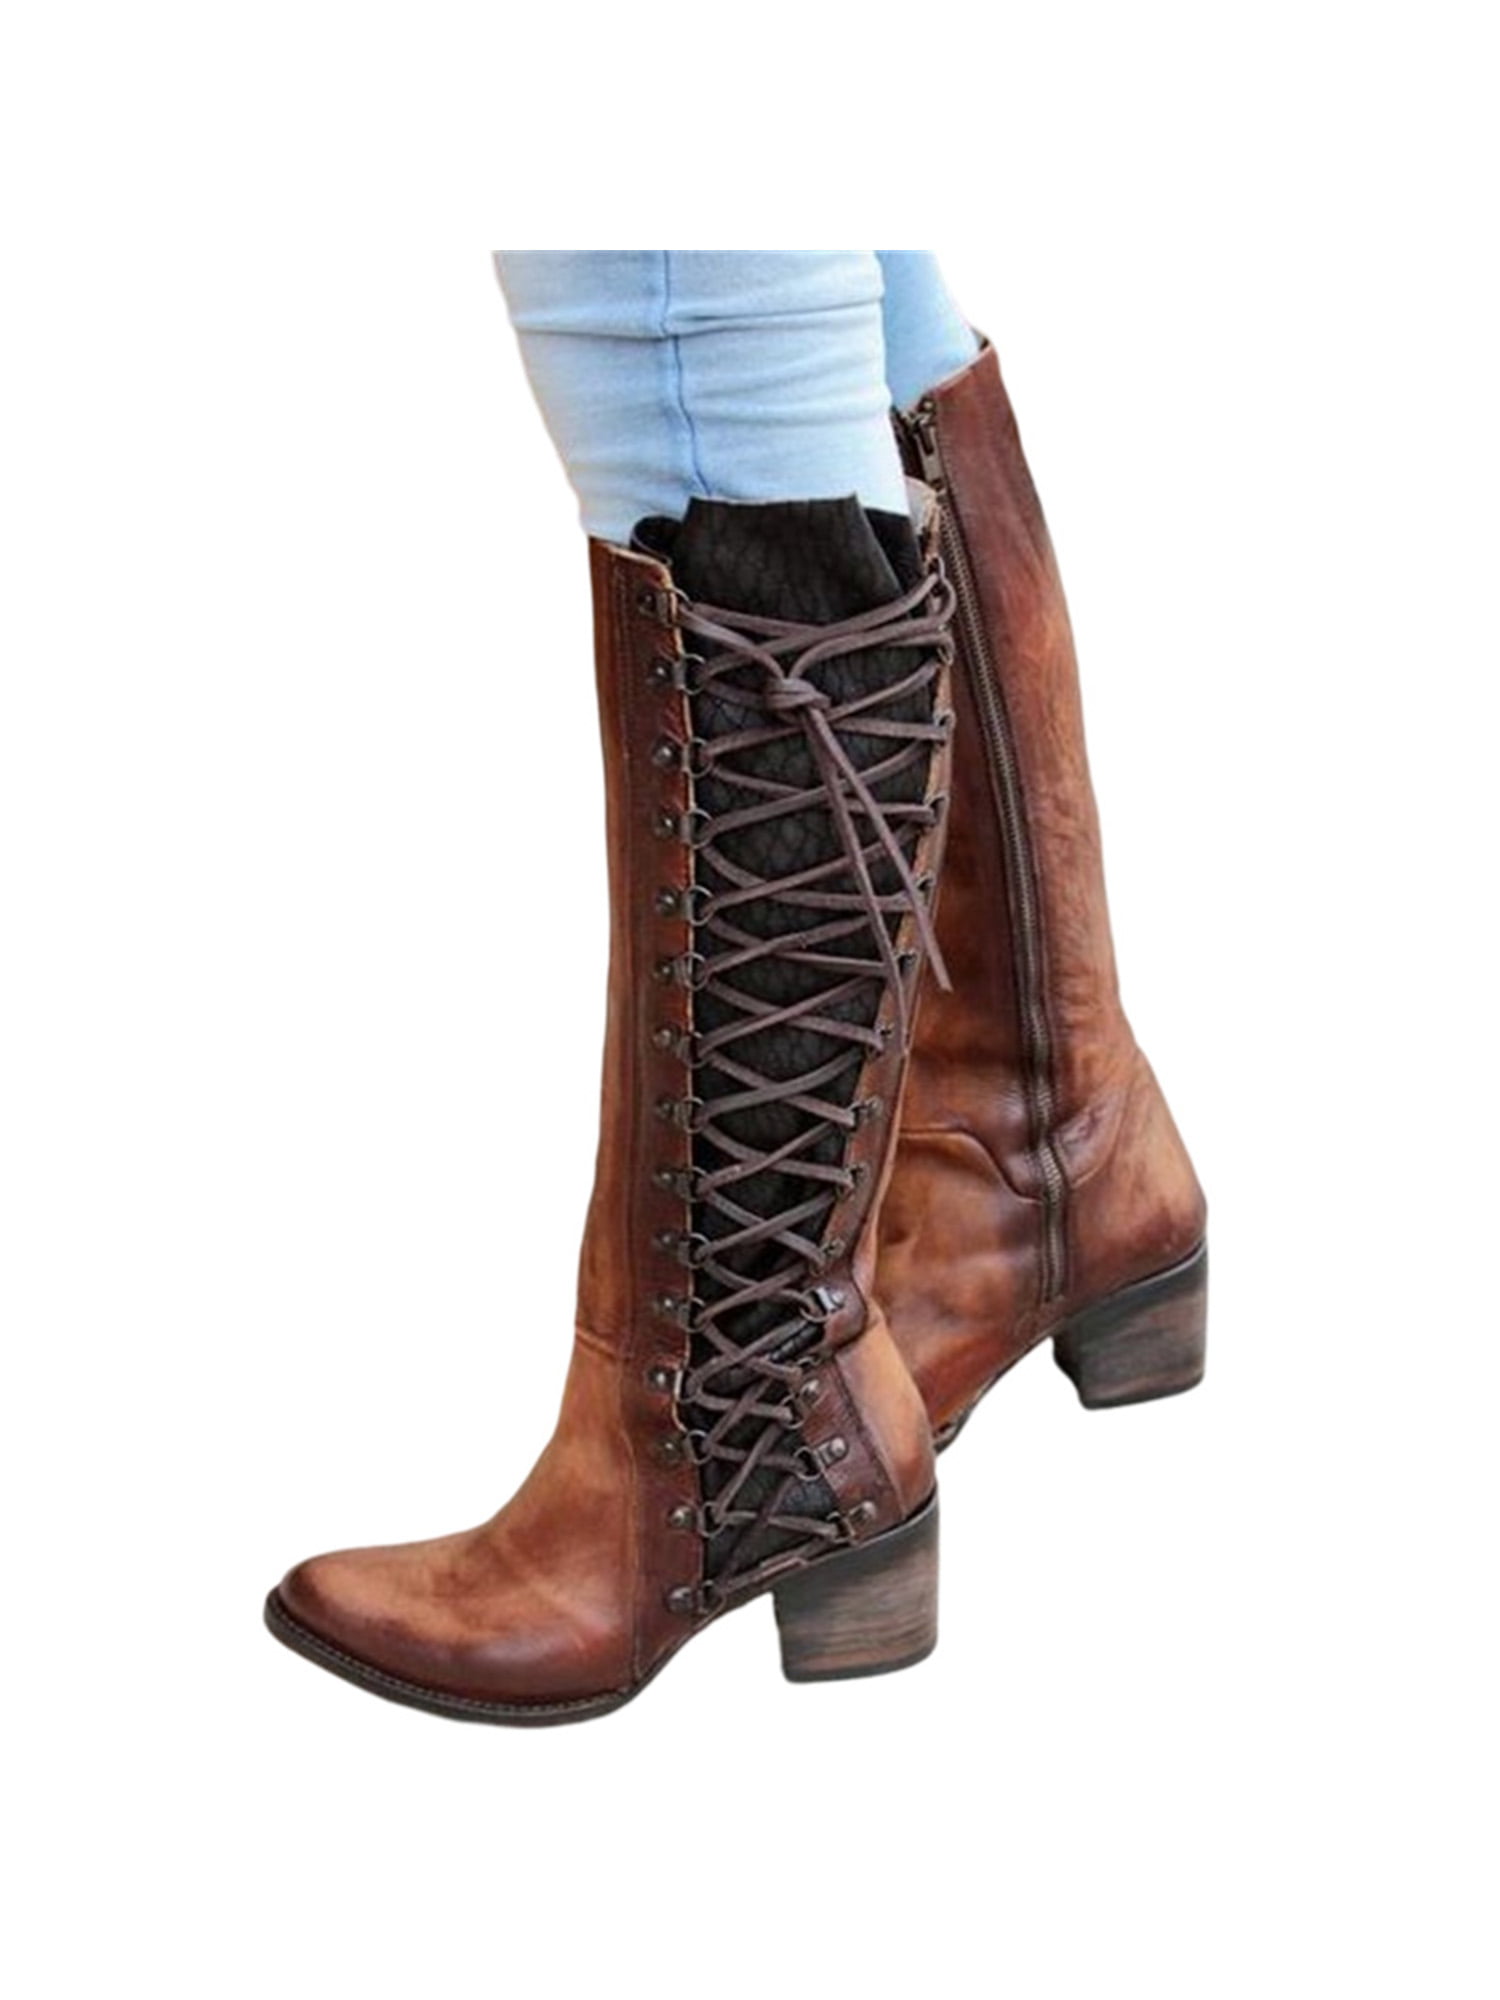 Women Tall Knee High Mid Calf Faux Leather Low Flat Heels Causal Riding Boots 